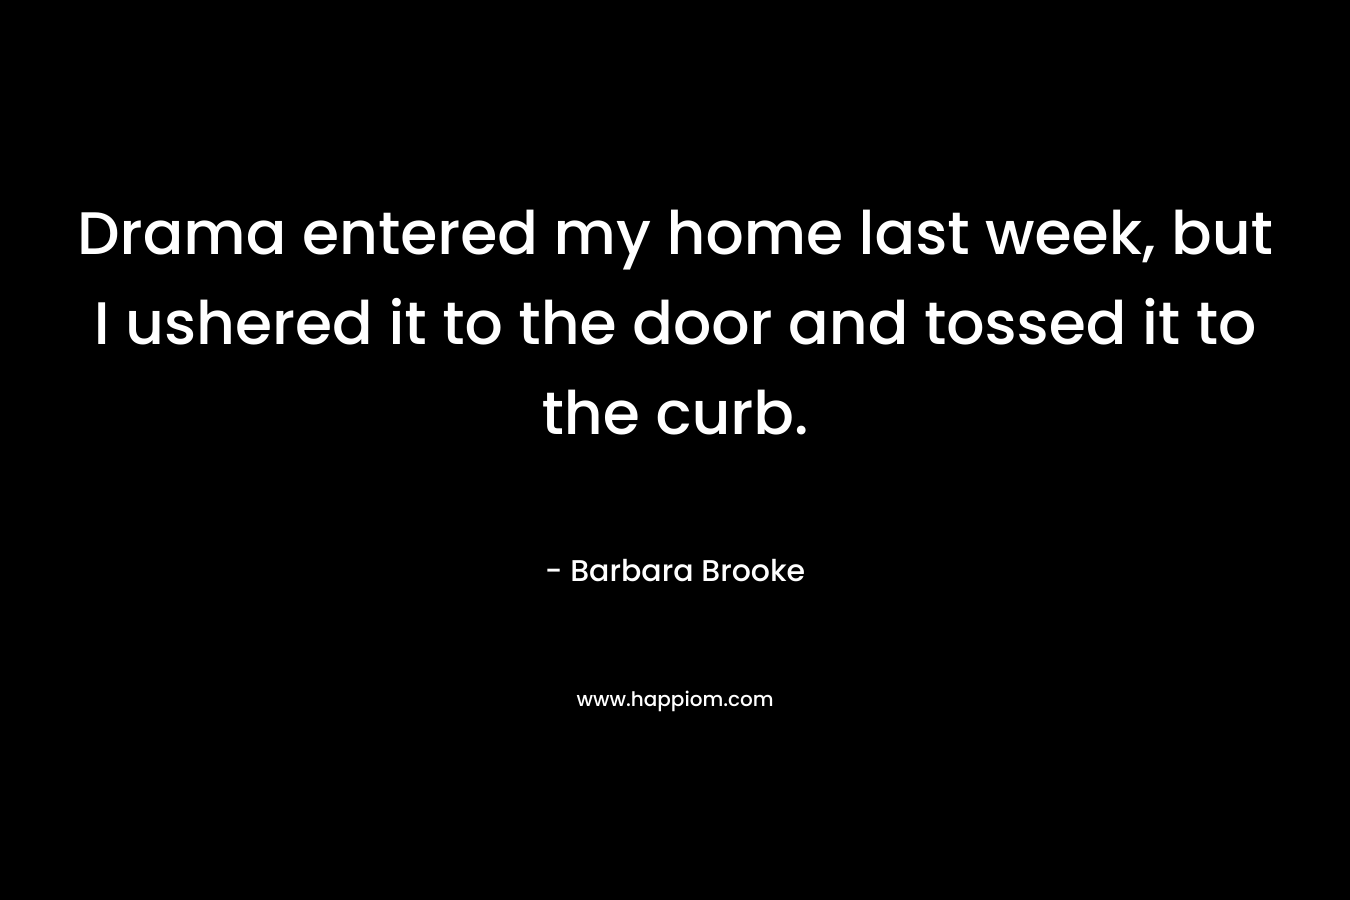 Drama entered my home last week, but I ushered it to the door and tossed it to the curb. – Barbara Brooke